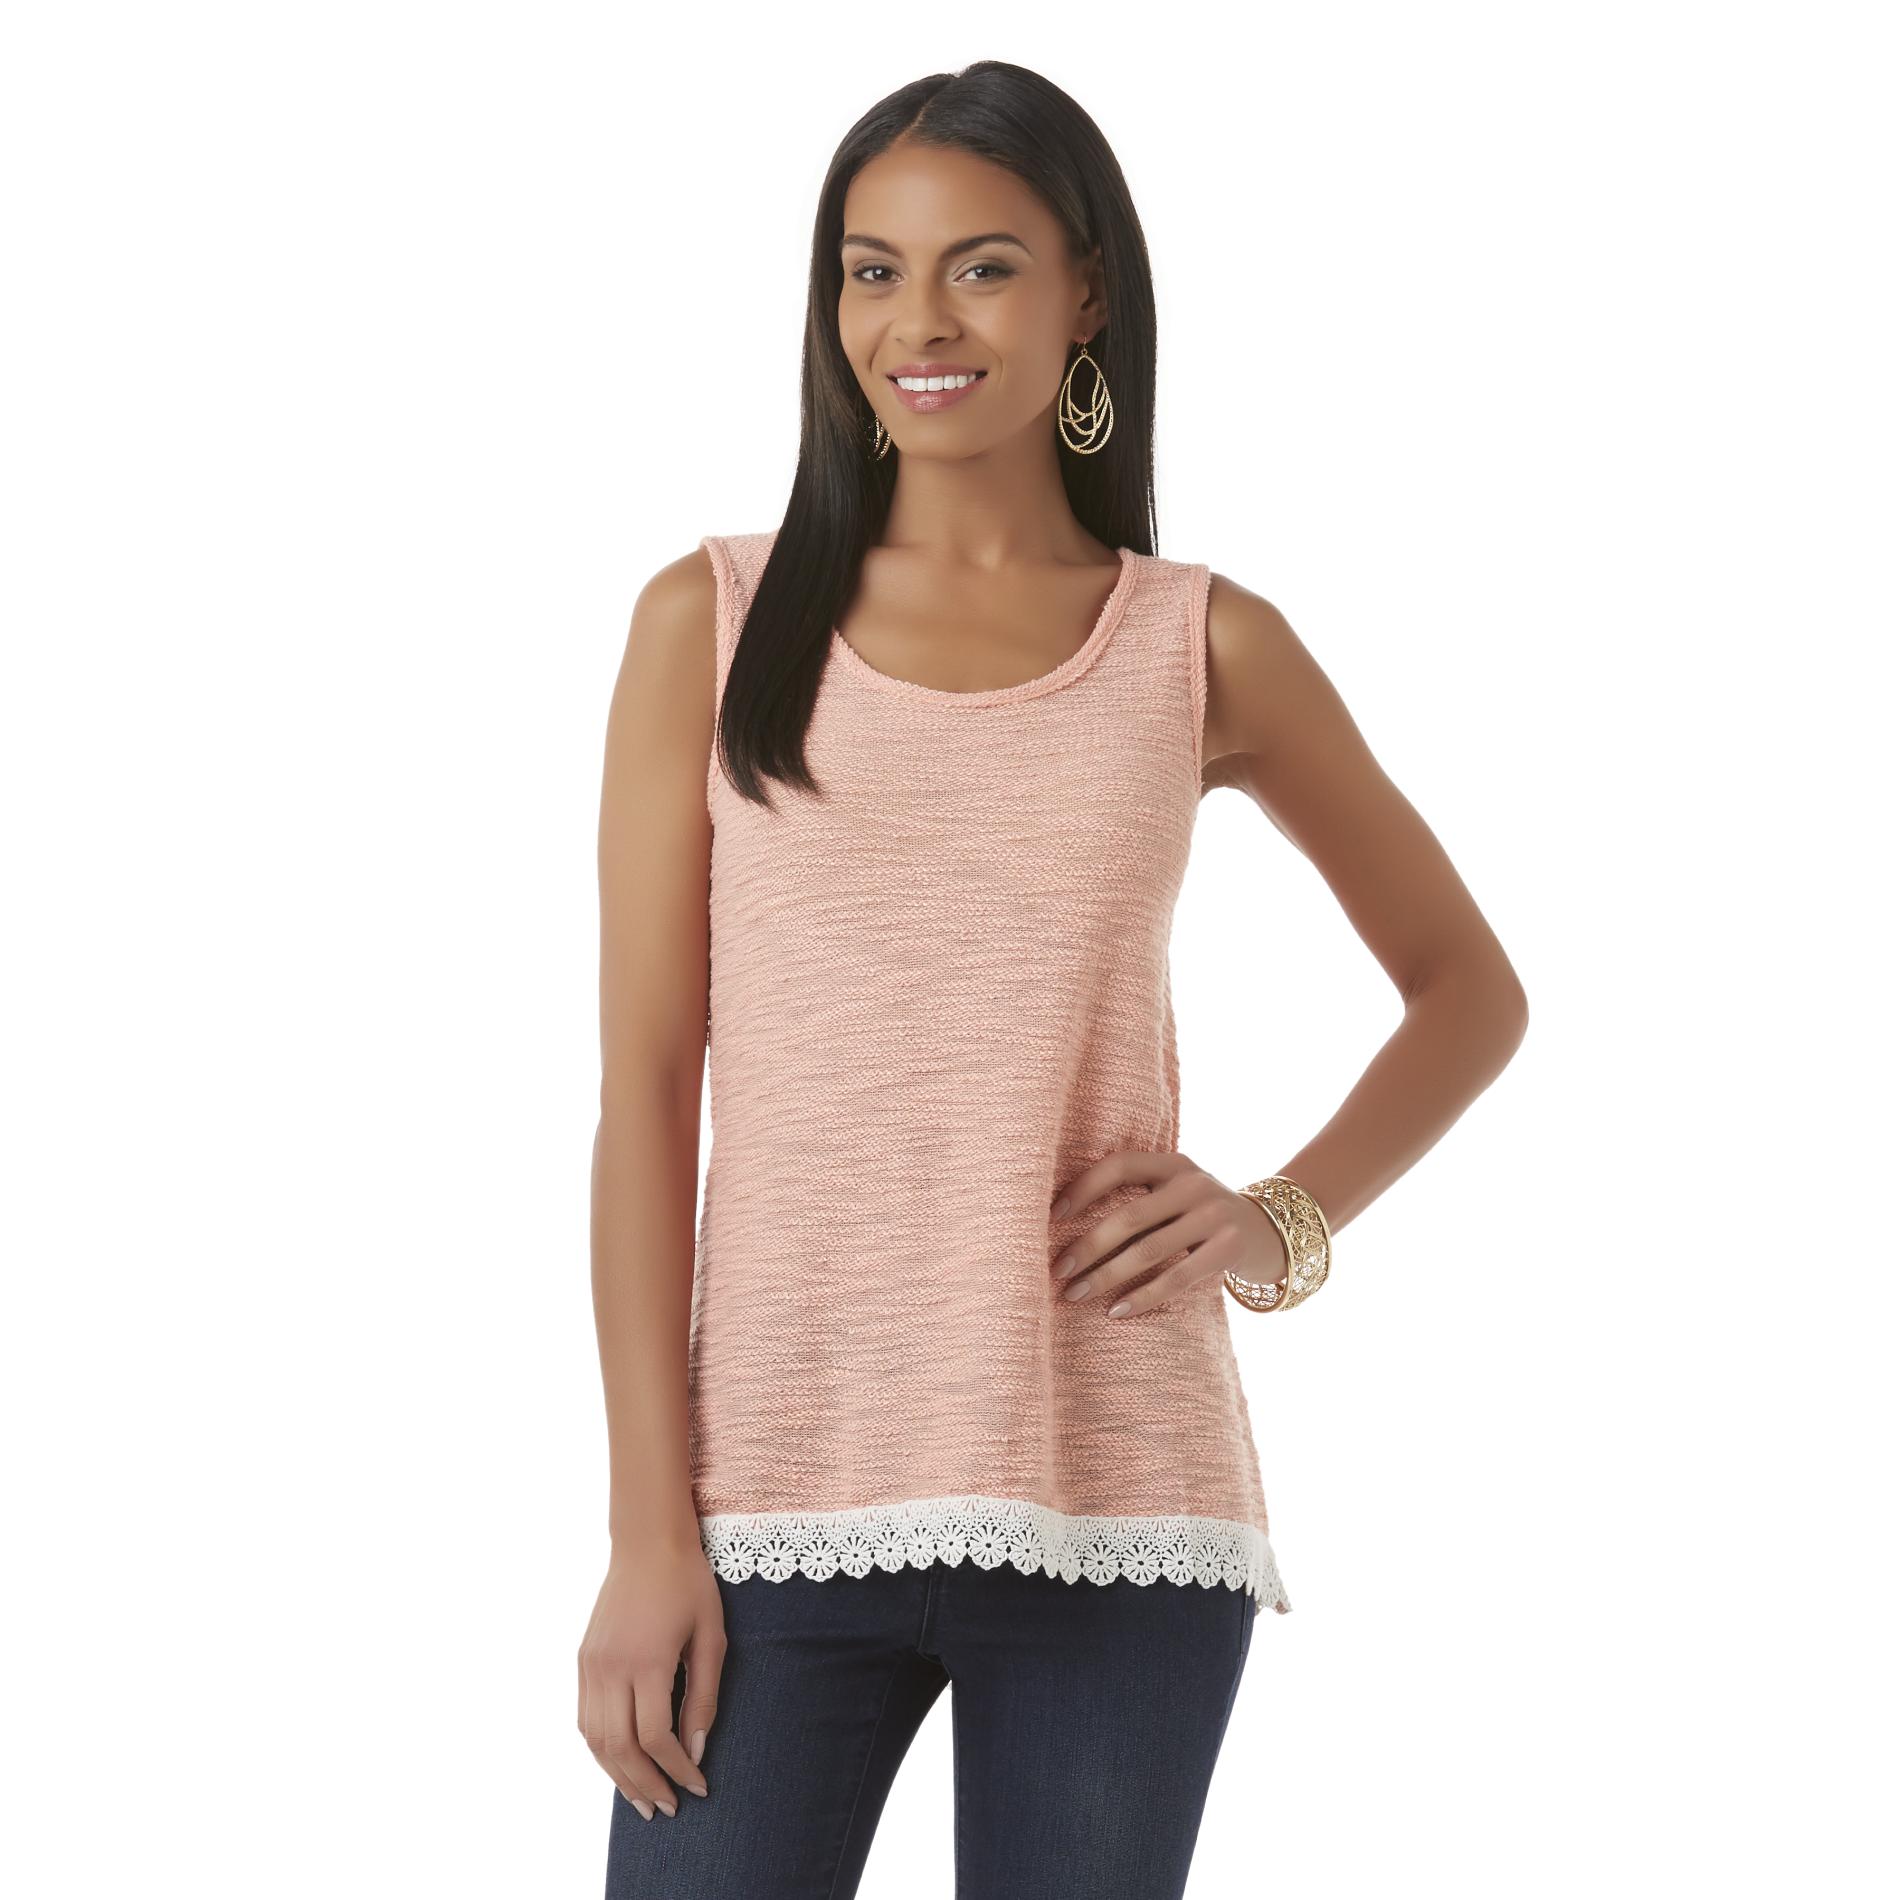 Attention Women's High-Low Knit Tank Top